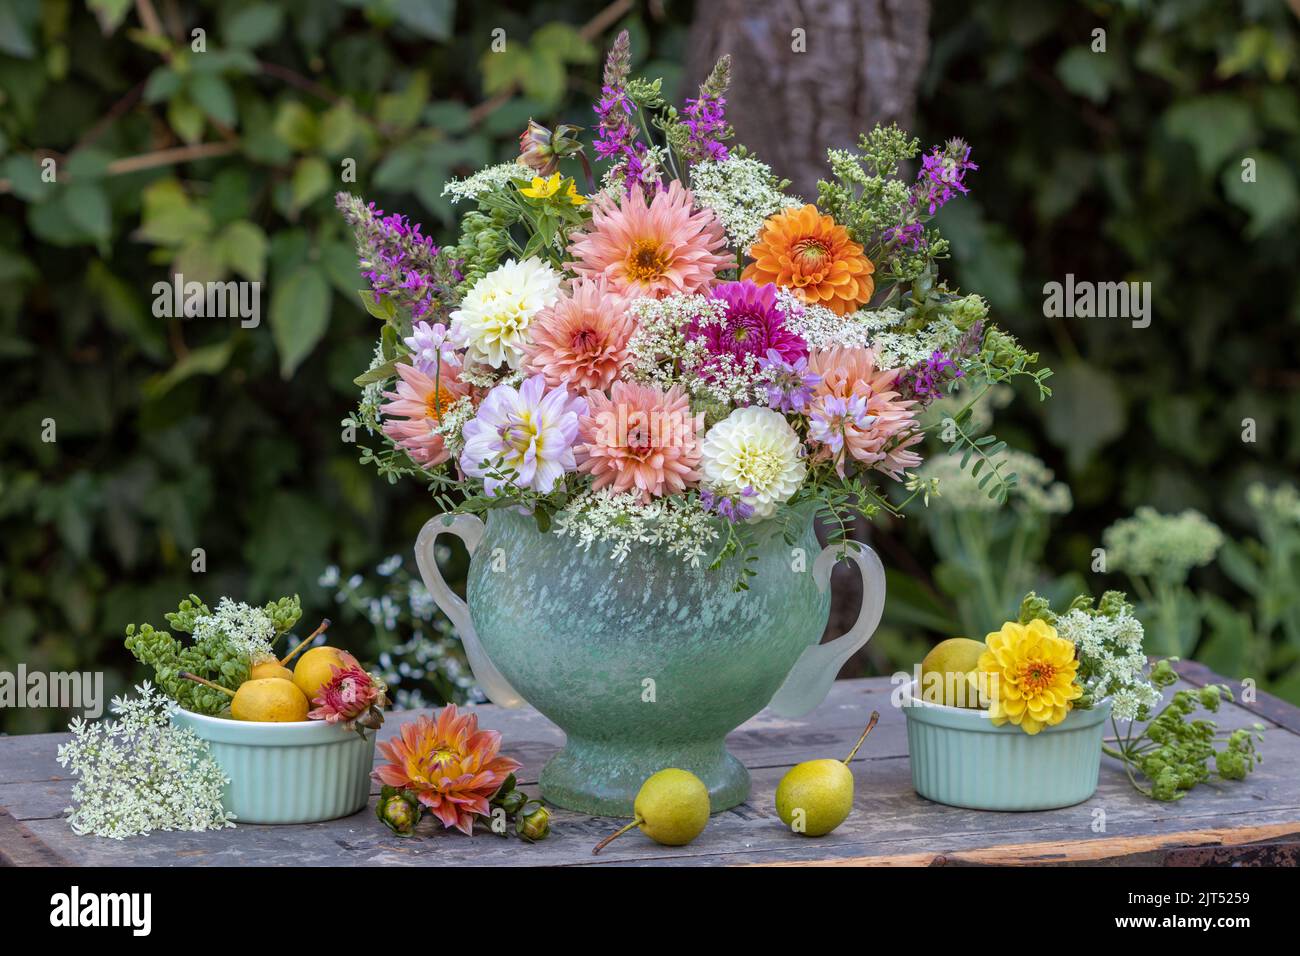 arrangement with bouquet of dahlia flowers, wild carrots and meadow sage Stock Photo